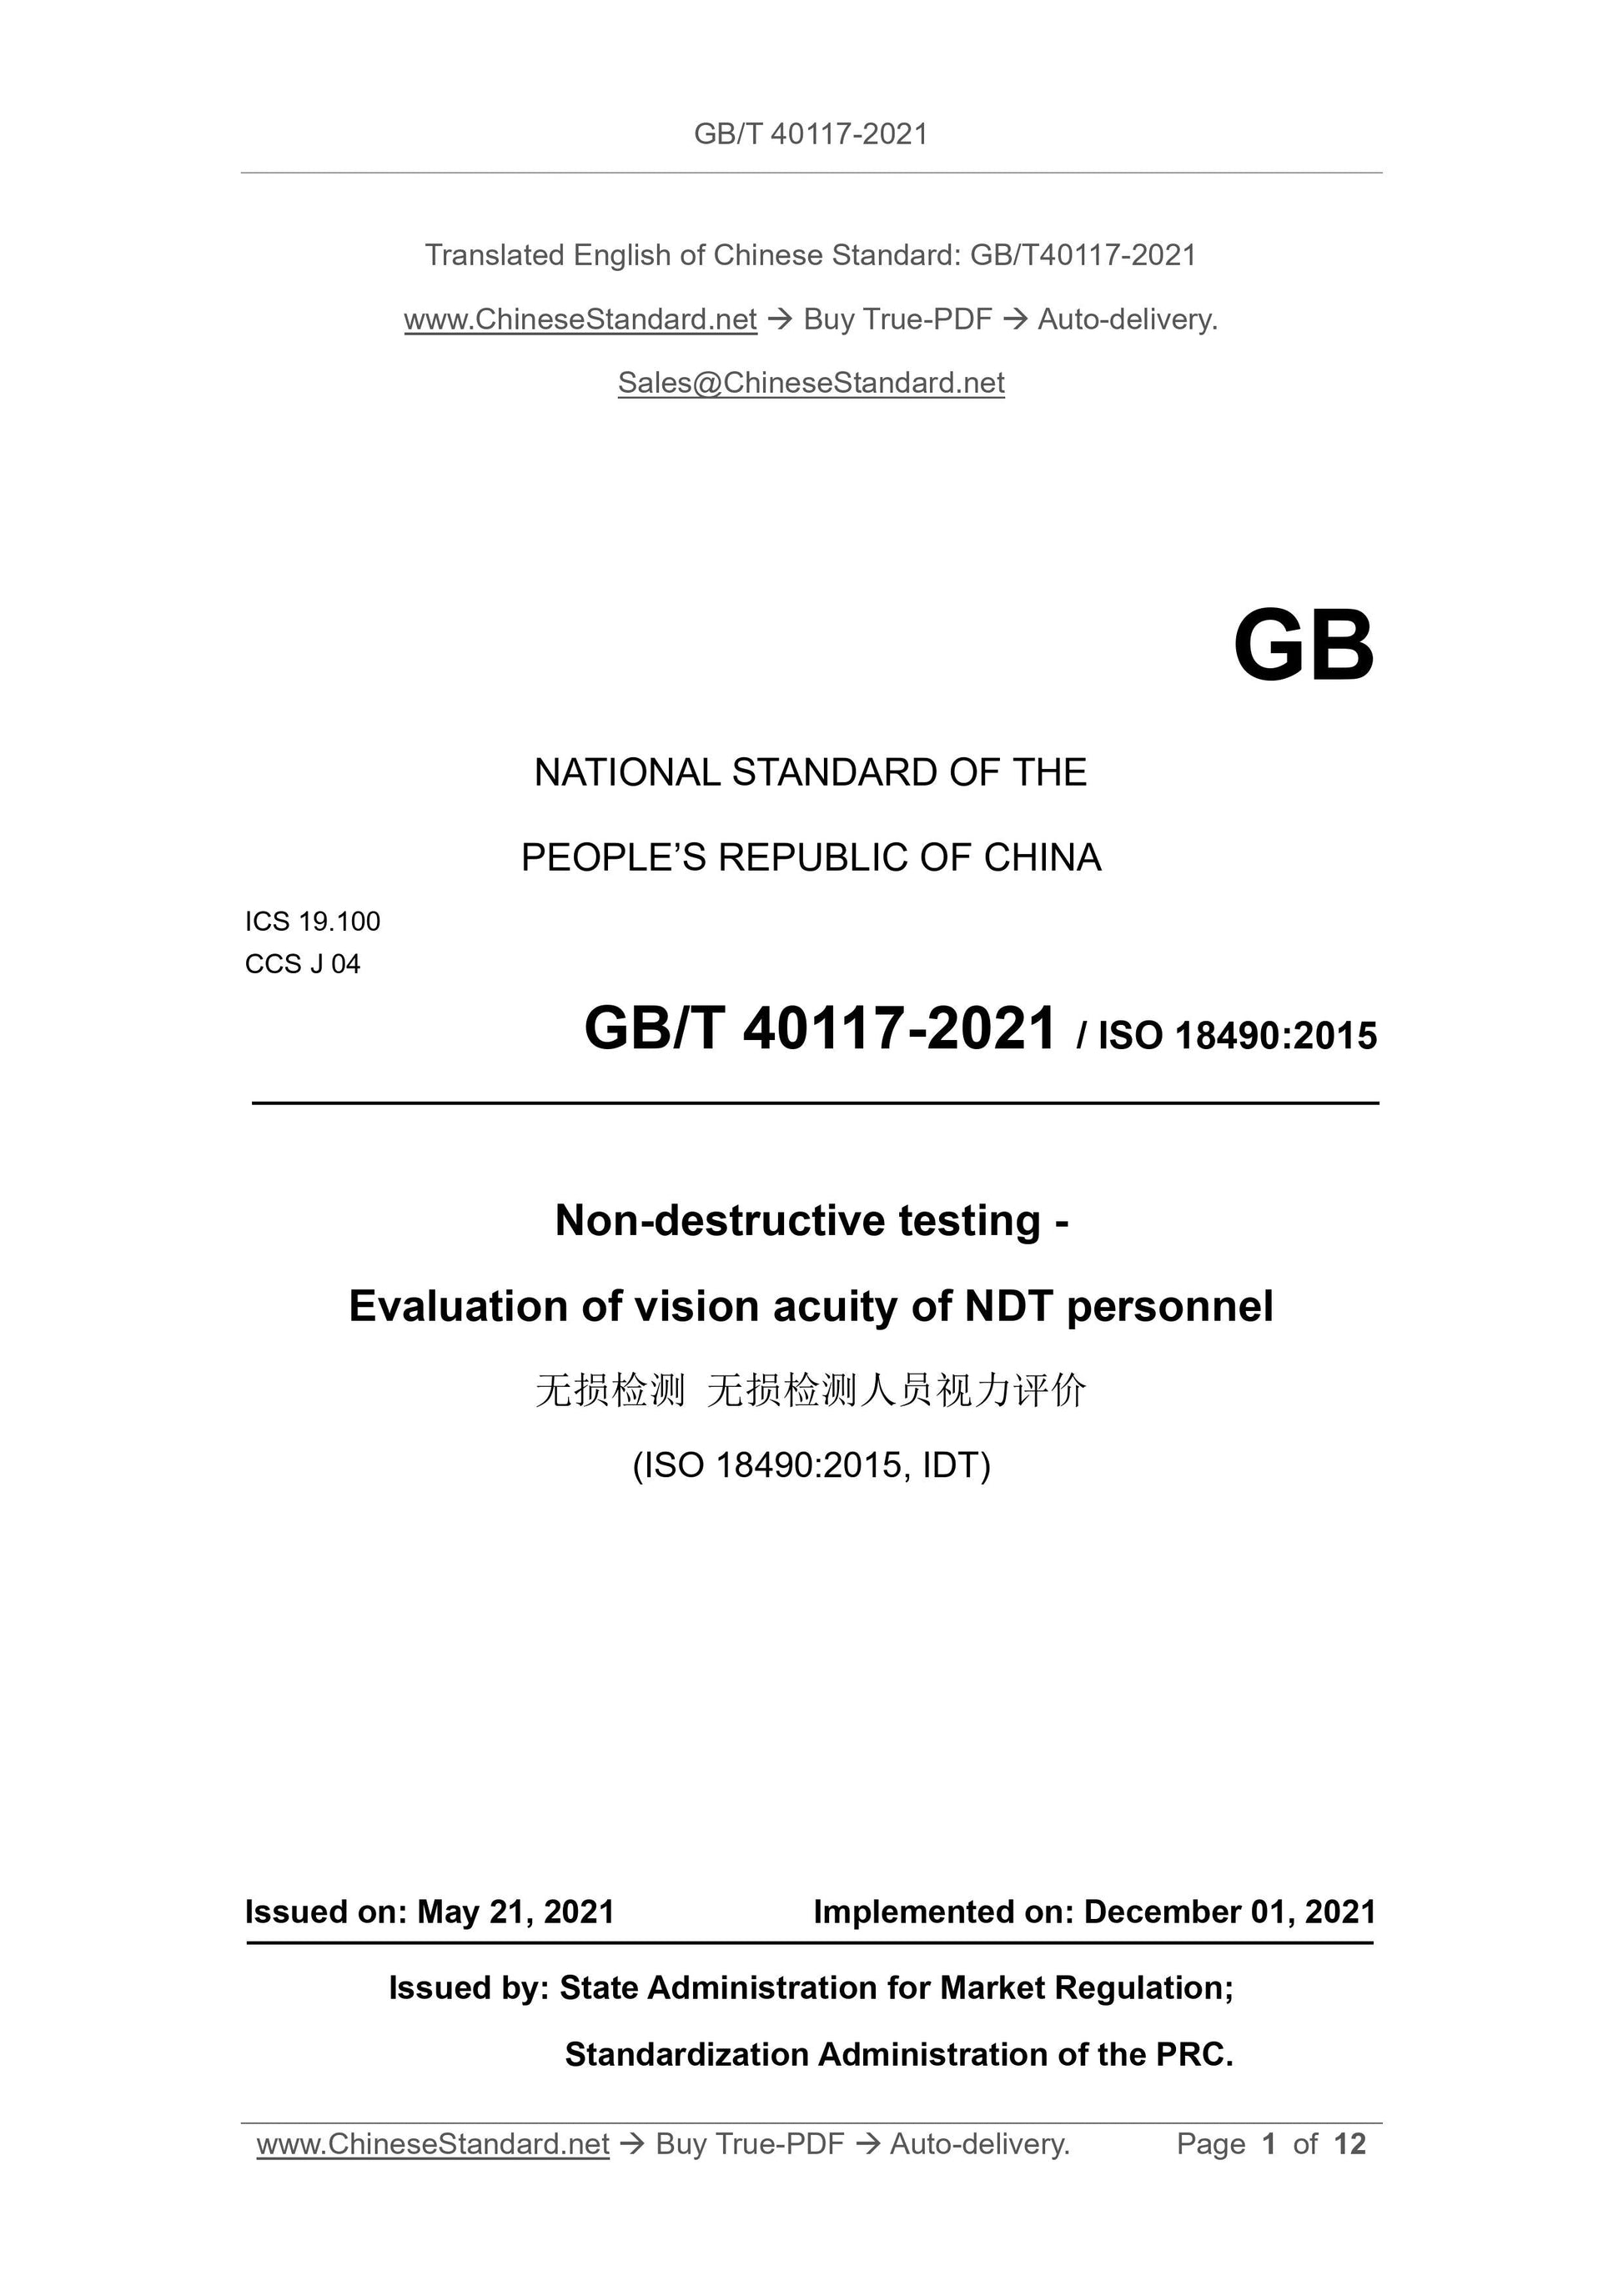 GB/T 40117-2021 Page 1